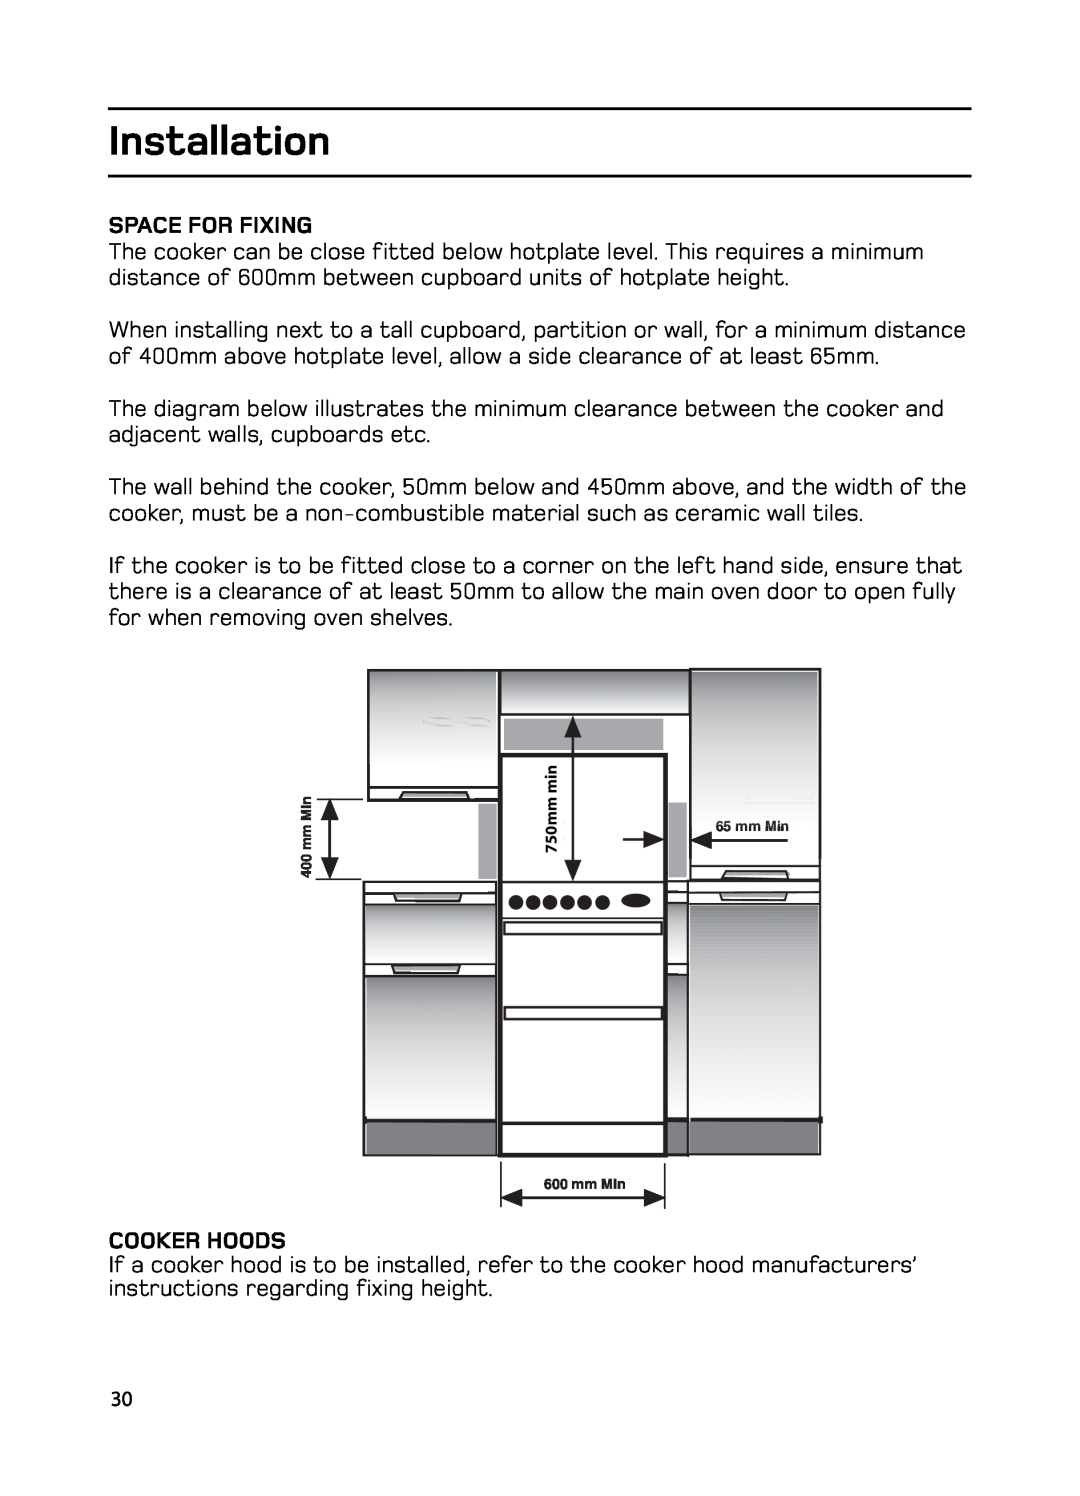 Hotpoint GW74 manual Space For Fixing, Cooker Hoods, Installation, 750mm 